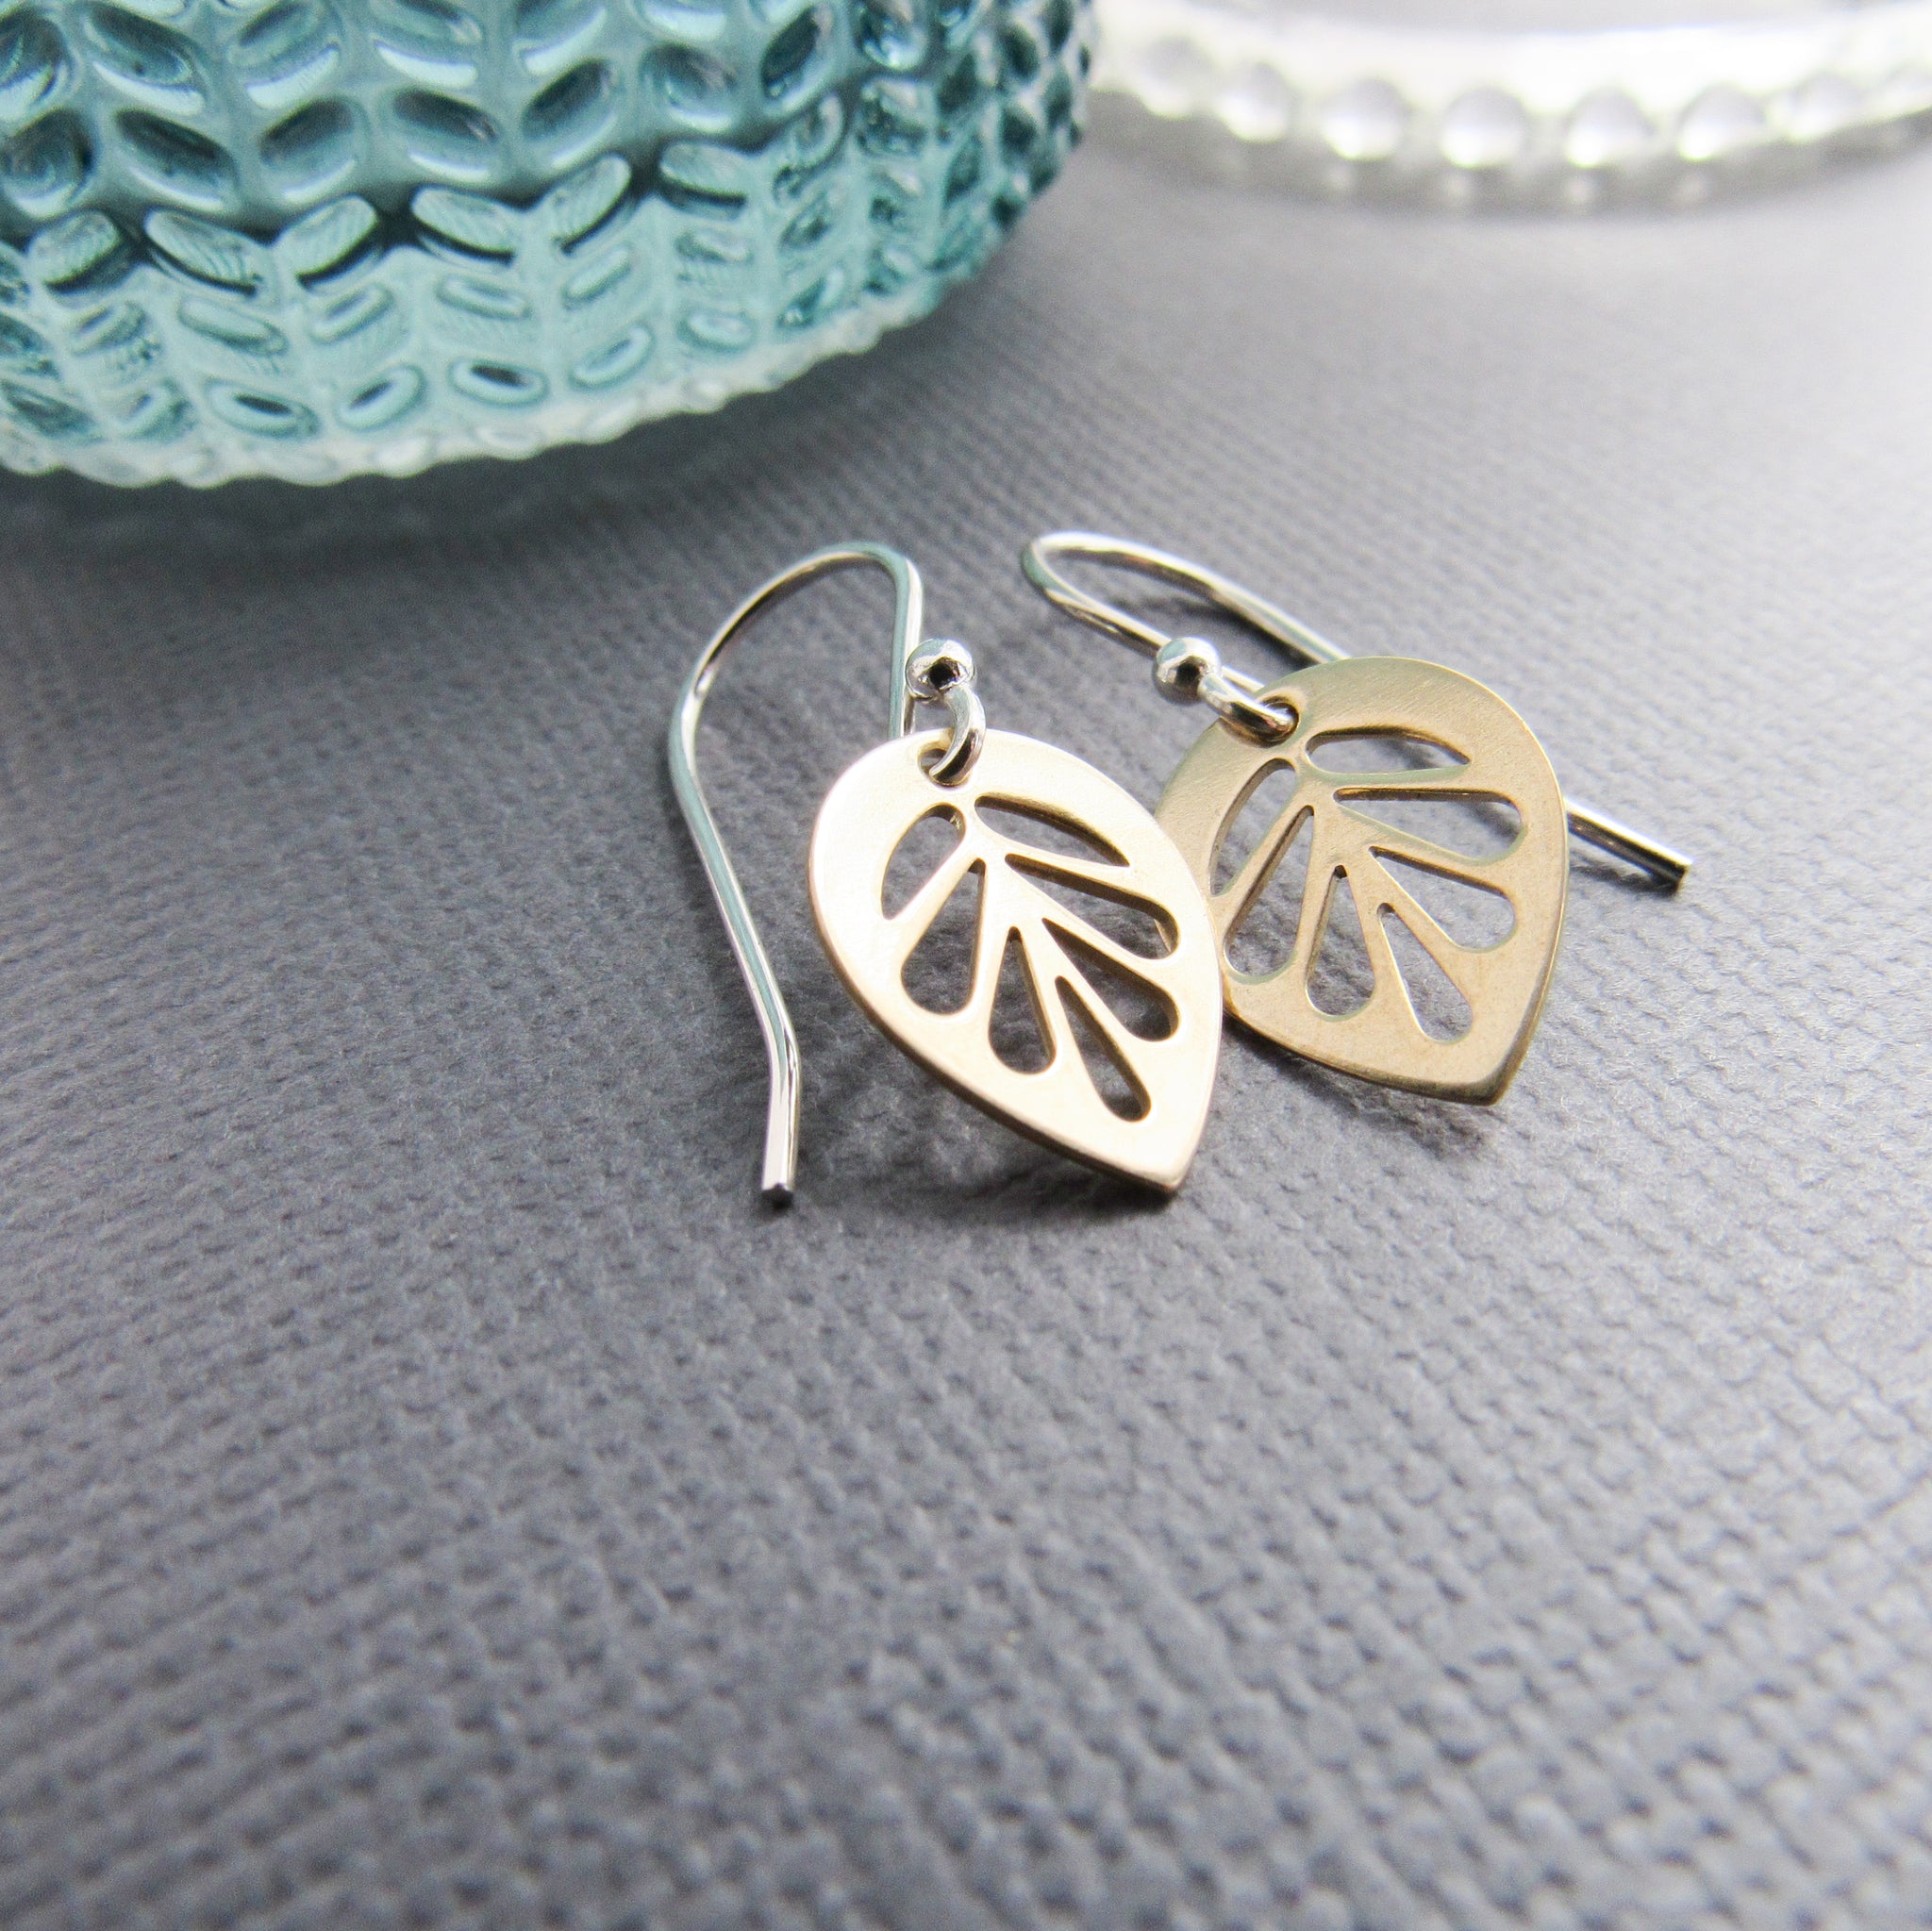 Evermore Ginkgo Leaf Earrings – Morning Moon Nature Jewelry